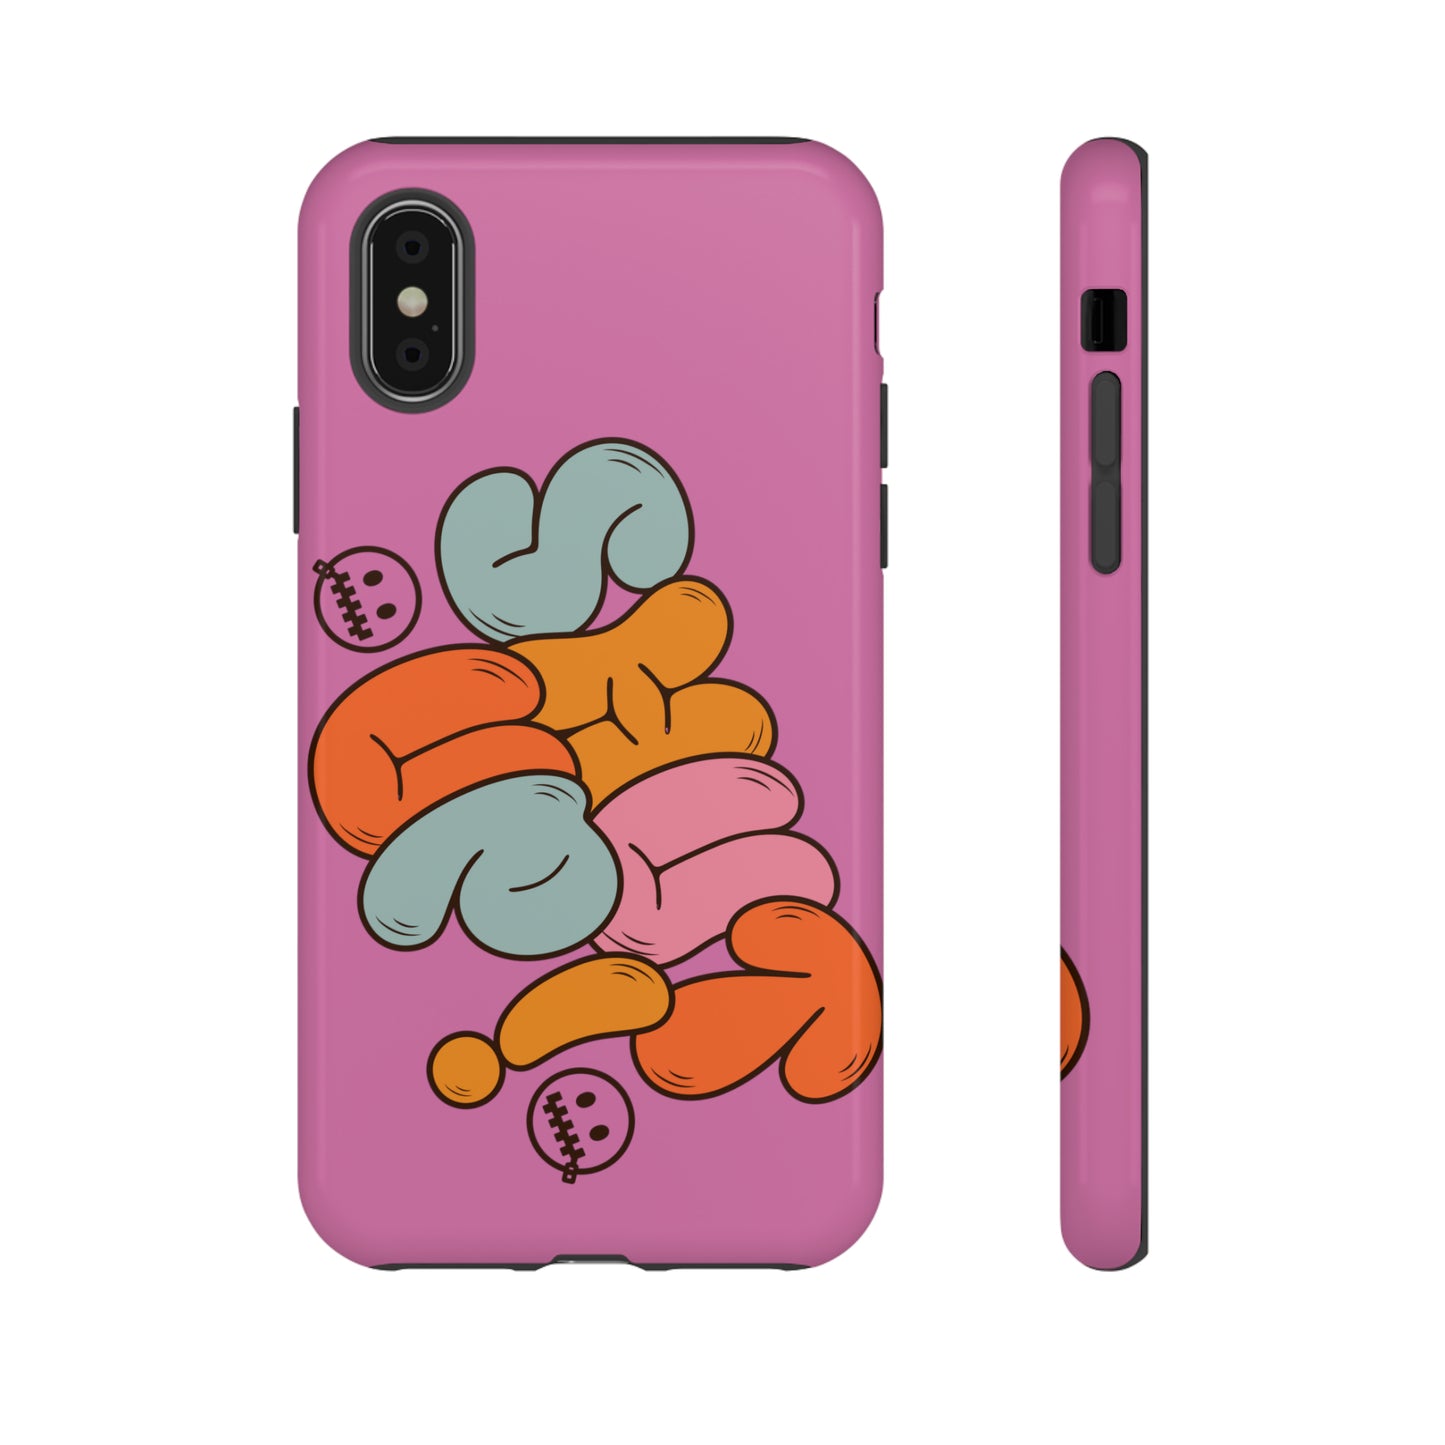 Bold retro colors with 'Shut Up' text for iPhone models